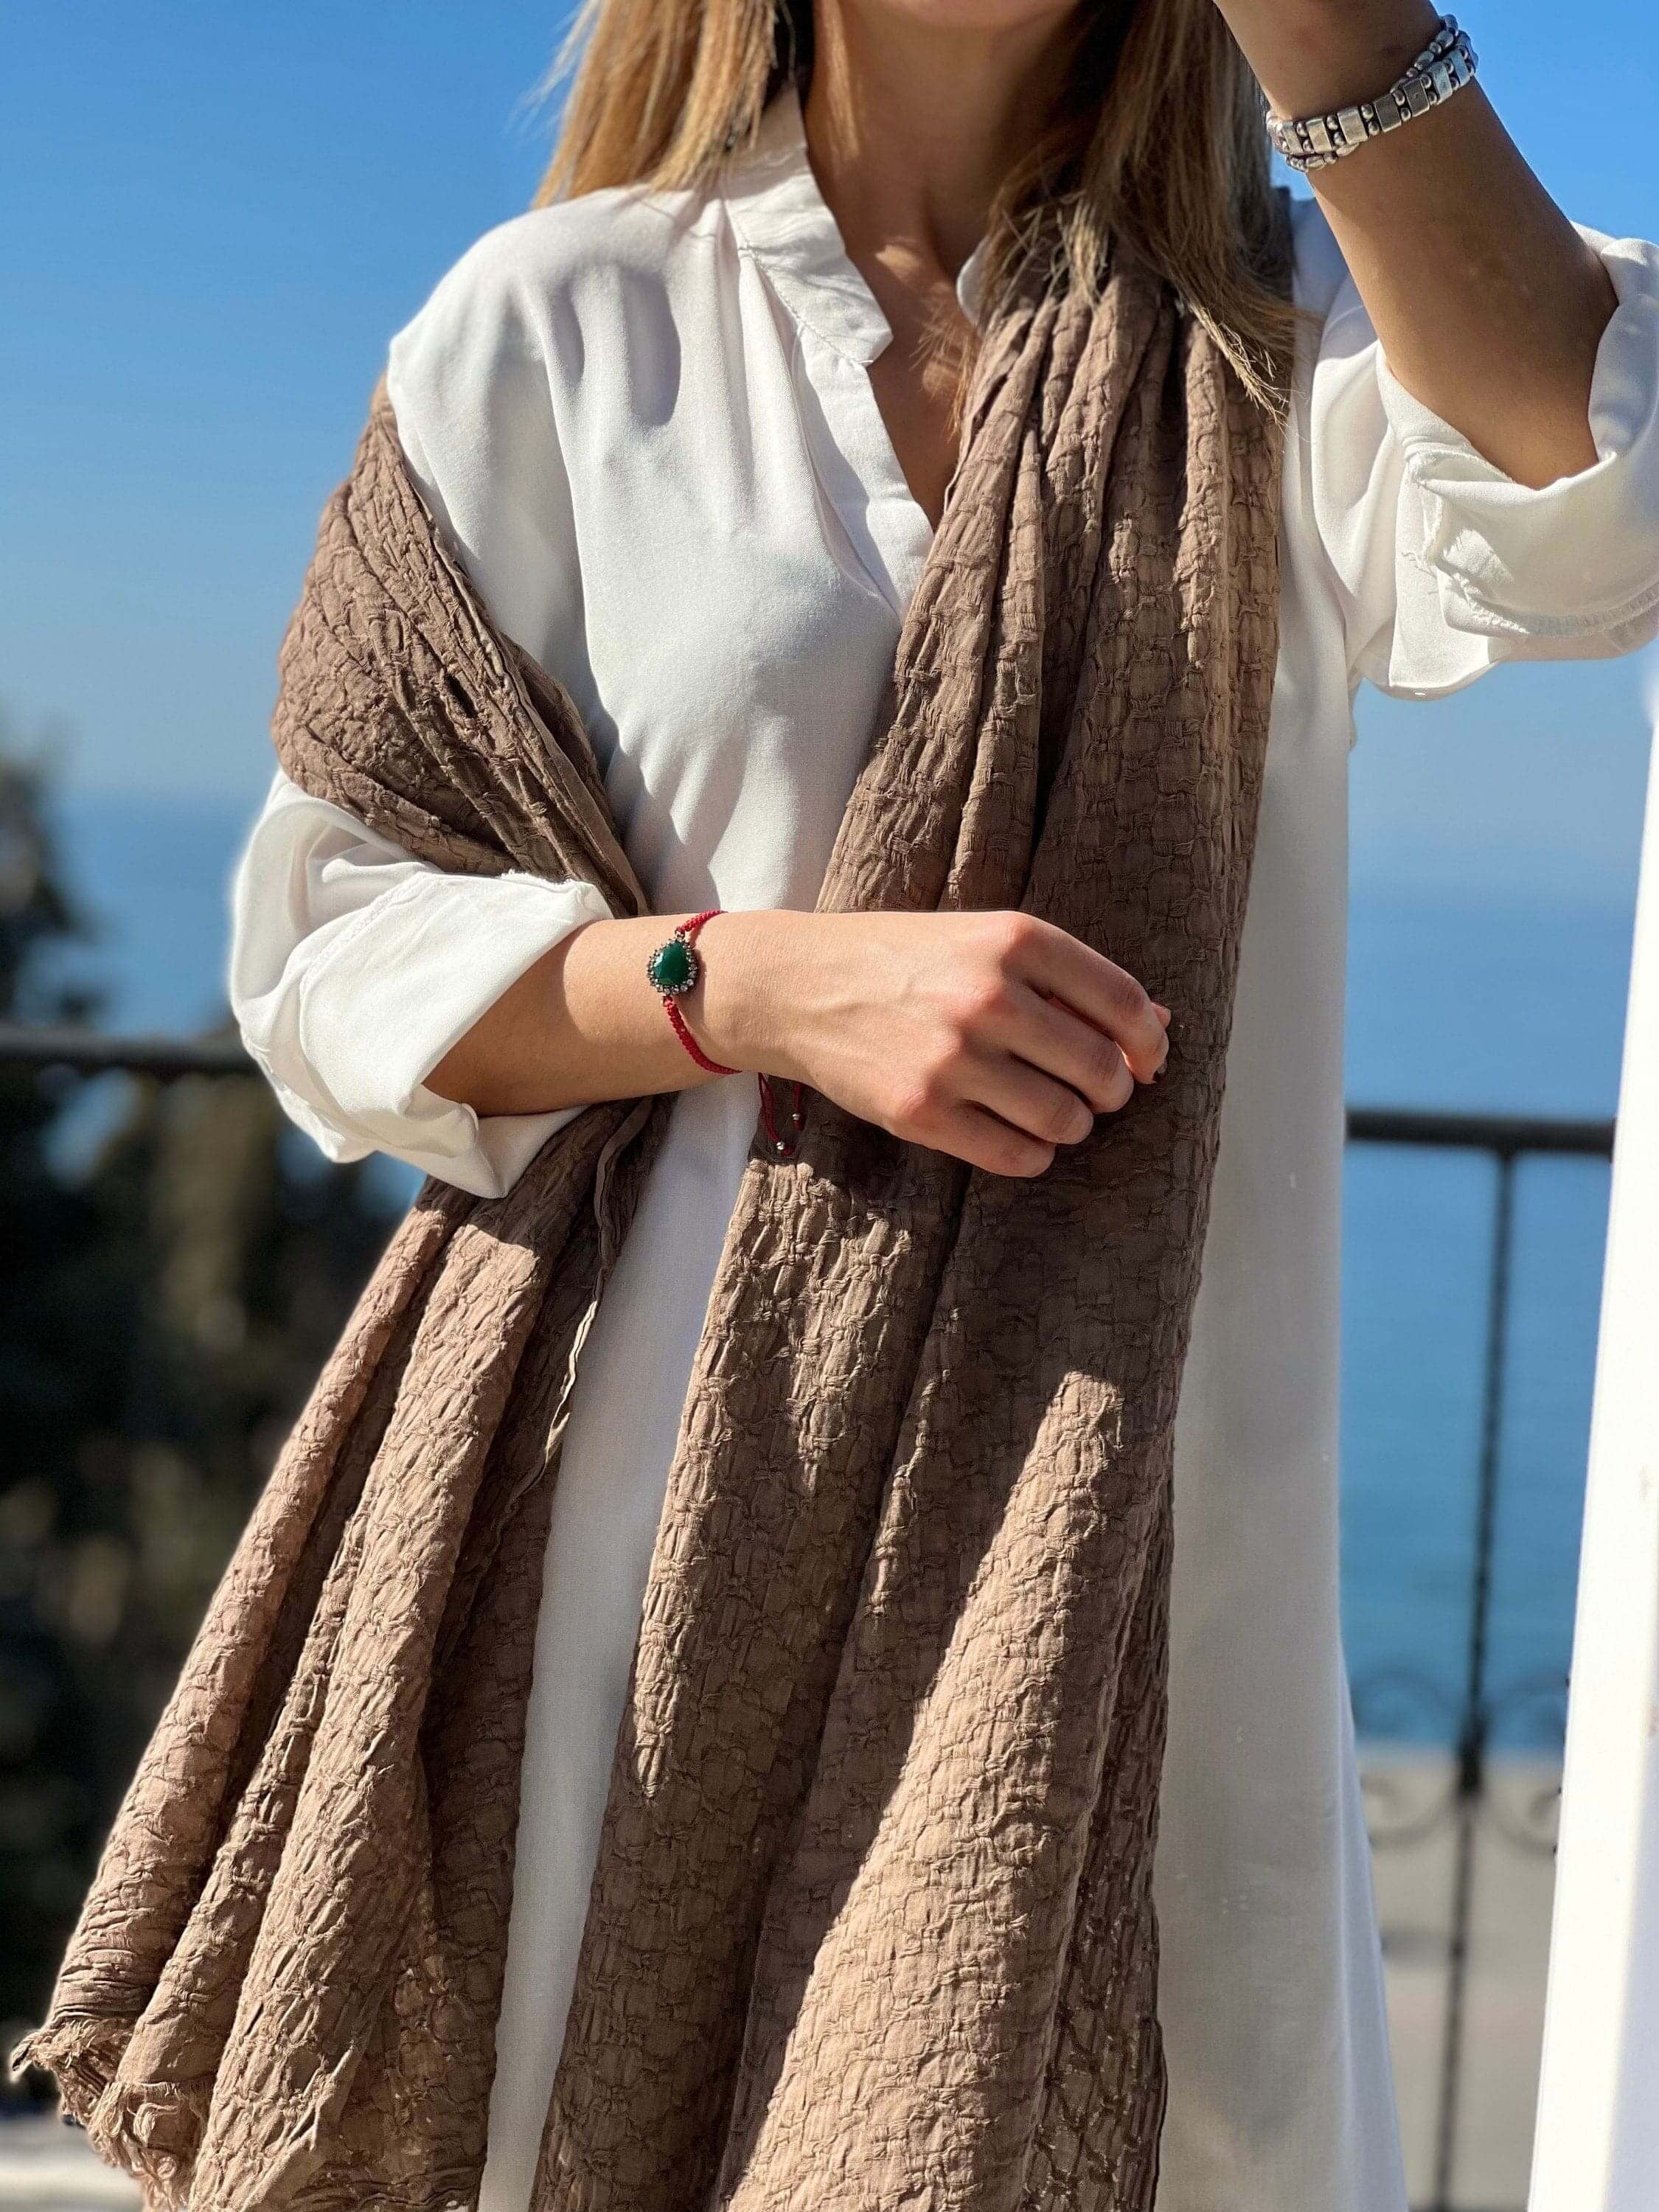 Choosing a scarf as an accessory in your outfit can be a good idea; it adds beauty and elegance to your fashion game, be it for religious purposes, fashion purposes, or sun protection, a scarf always serves its purpose.